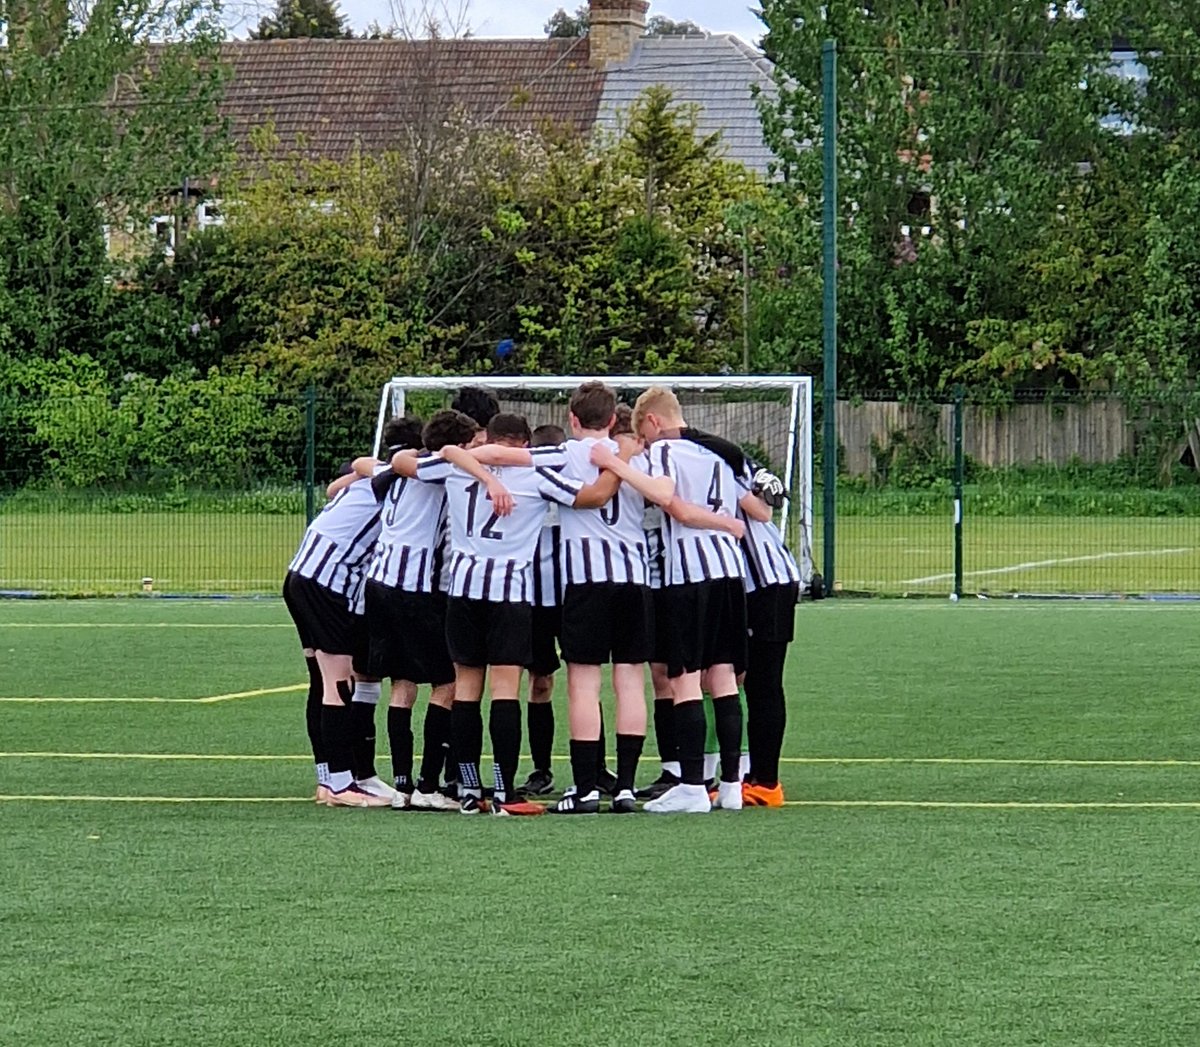 LEAGUE ACTION 

🗓 Tuesday, 30 April 2024

🏆U14 EJA Black League 

🏟 Silver Jubilee Park

🆚️ Harefield United Youth 

⏰️ 18:00 KO

📍 NW9 7NE

It's our last game of the season. The lads are aiming to secure runners up spot.

@EJALeague
@ColneyHeathFC
#Magpies #UTH
⚫️⚪️